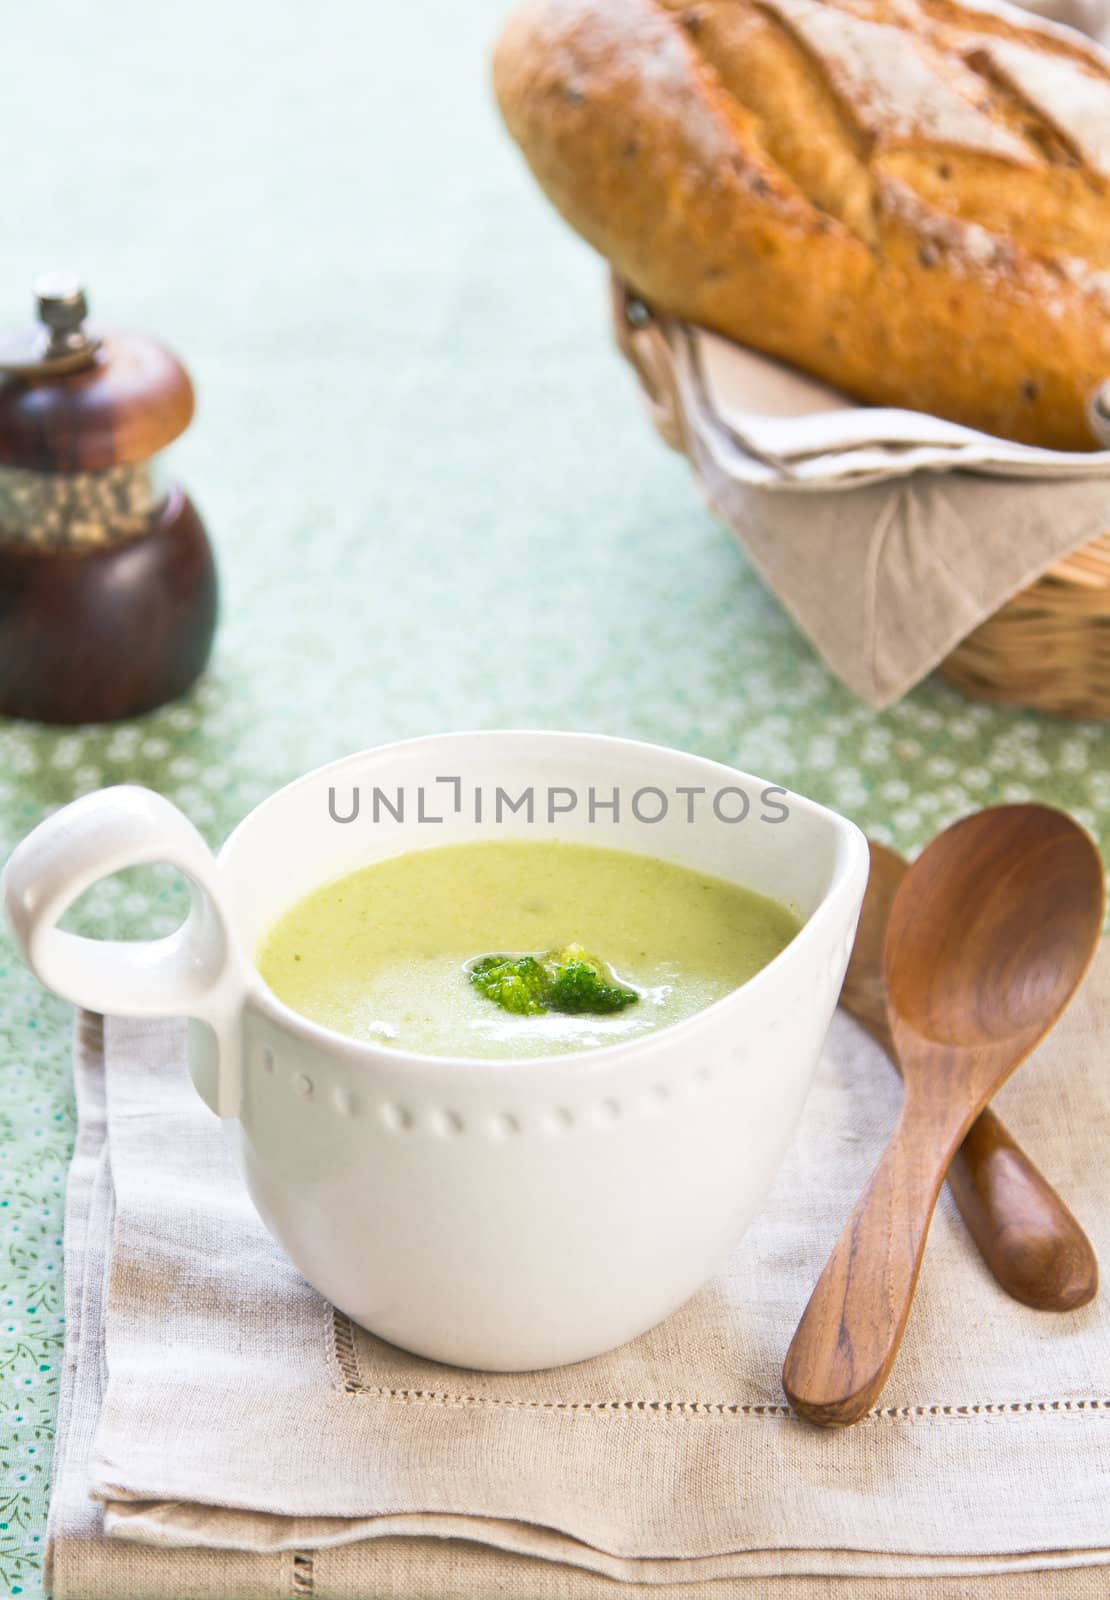 Broccoli soup by a loaf of wholemeal bread